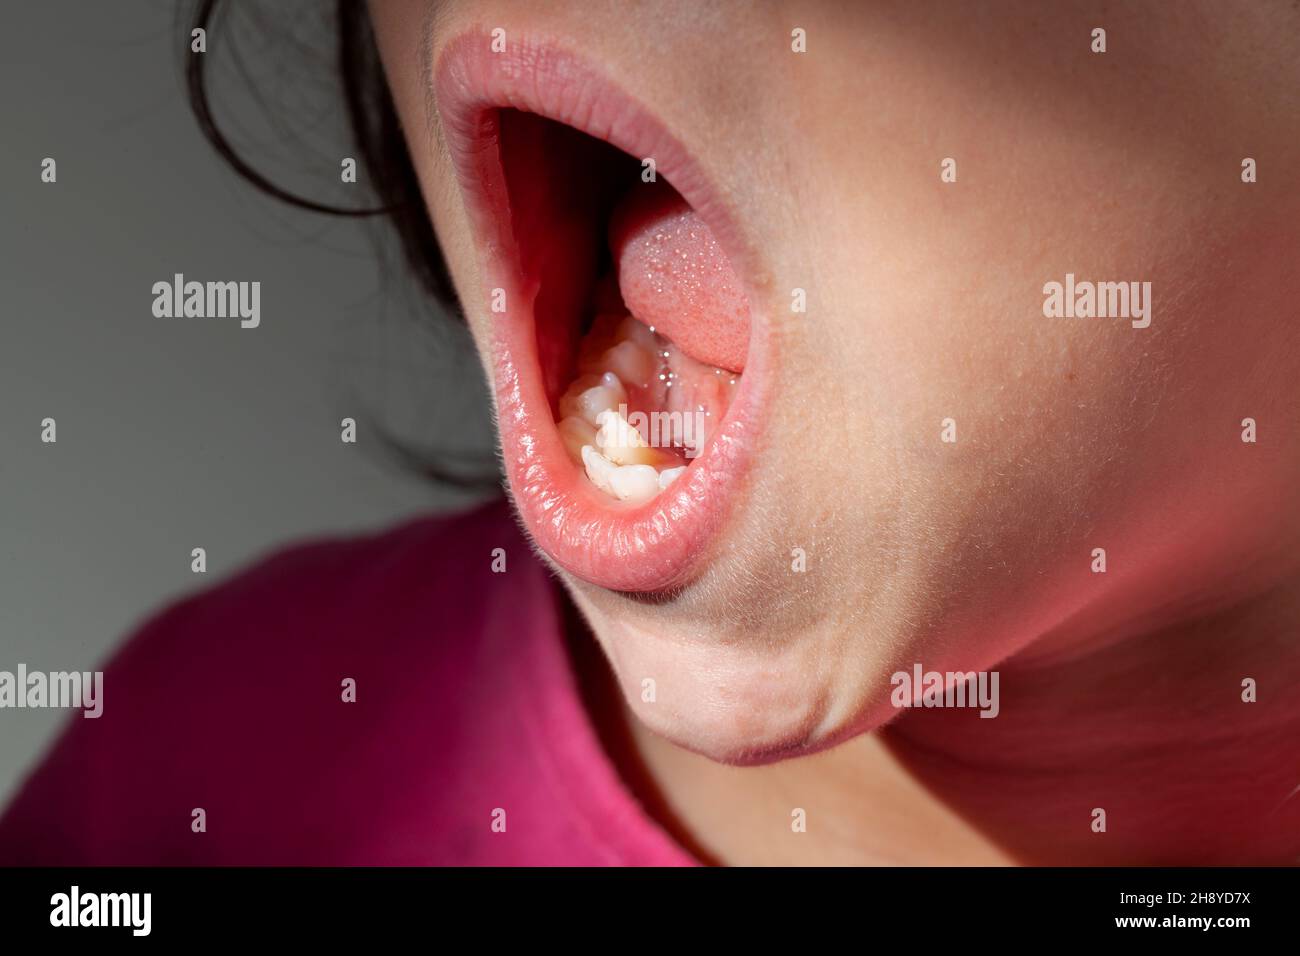 Orthodontic treatment concept image with a small girl showing her mouth. Misaligned teeth due to crowding in the lower jaw makes her a prime candidate Stock Photo